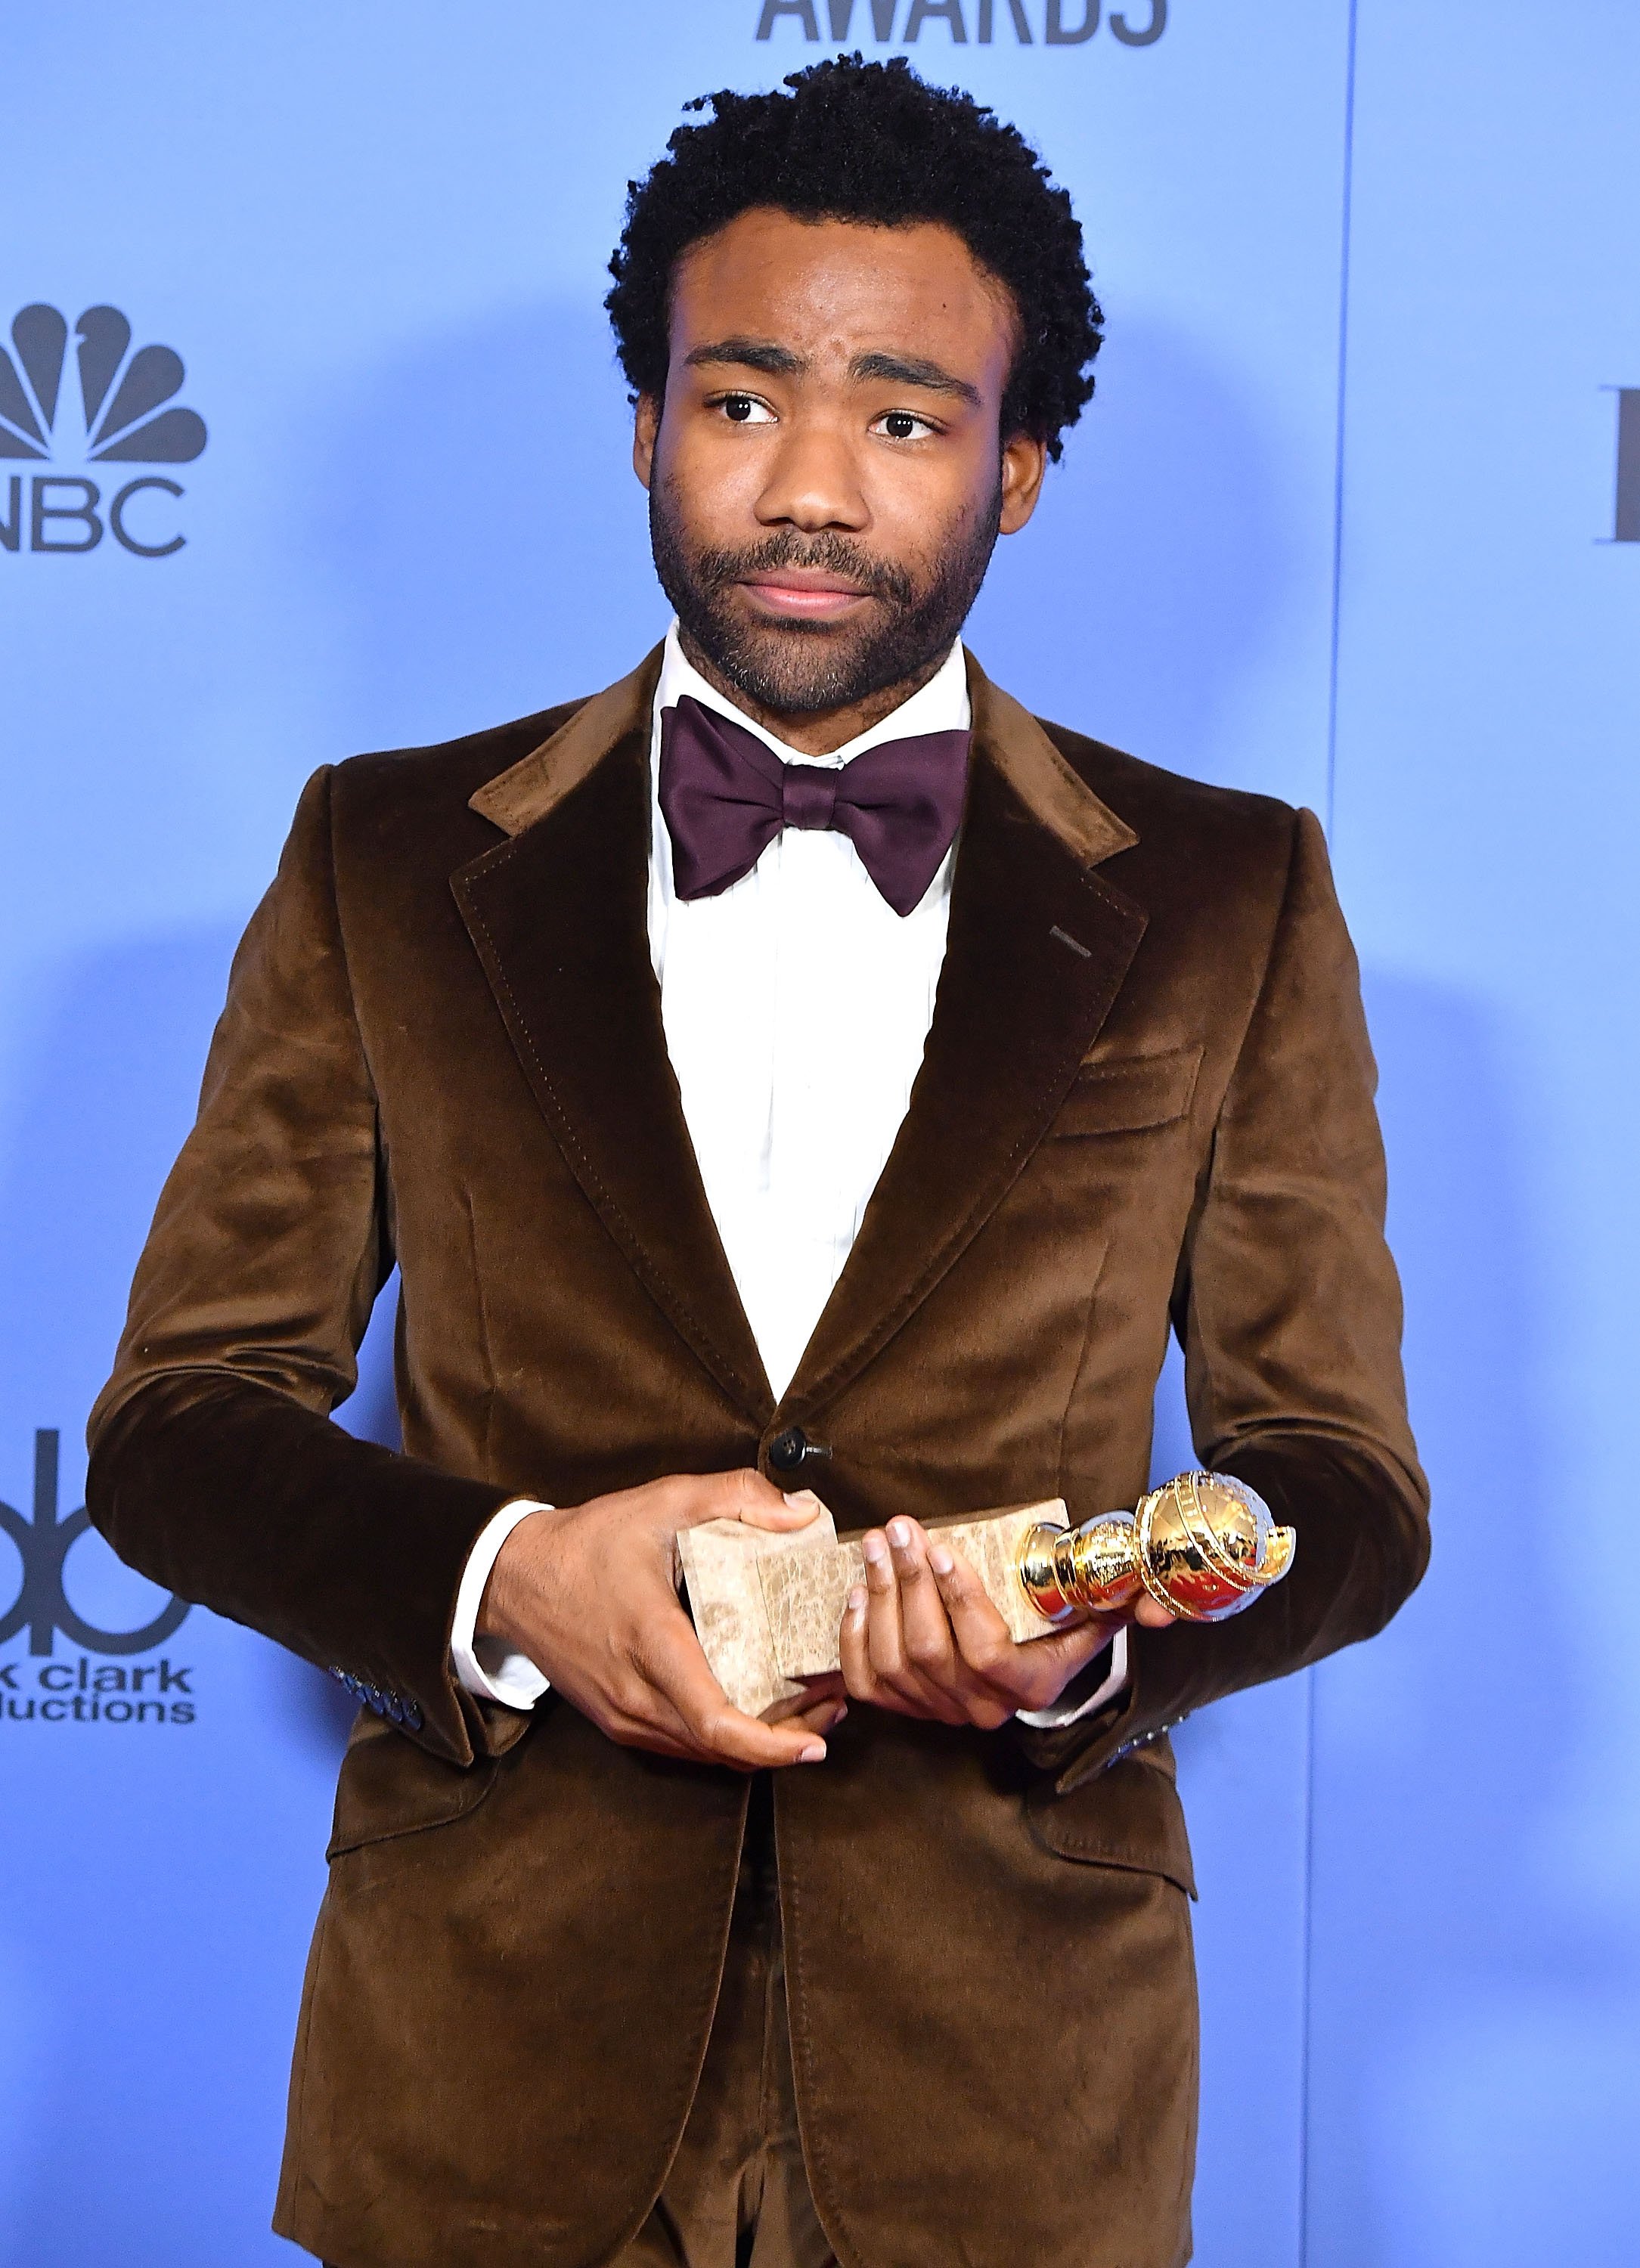 Donald Glover at The Beverly Hilton Hotel on January 8, 2017, in Beverly Hills, California. I Source: Getty Images